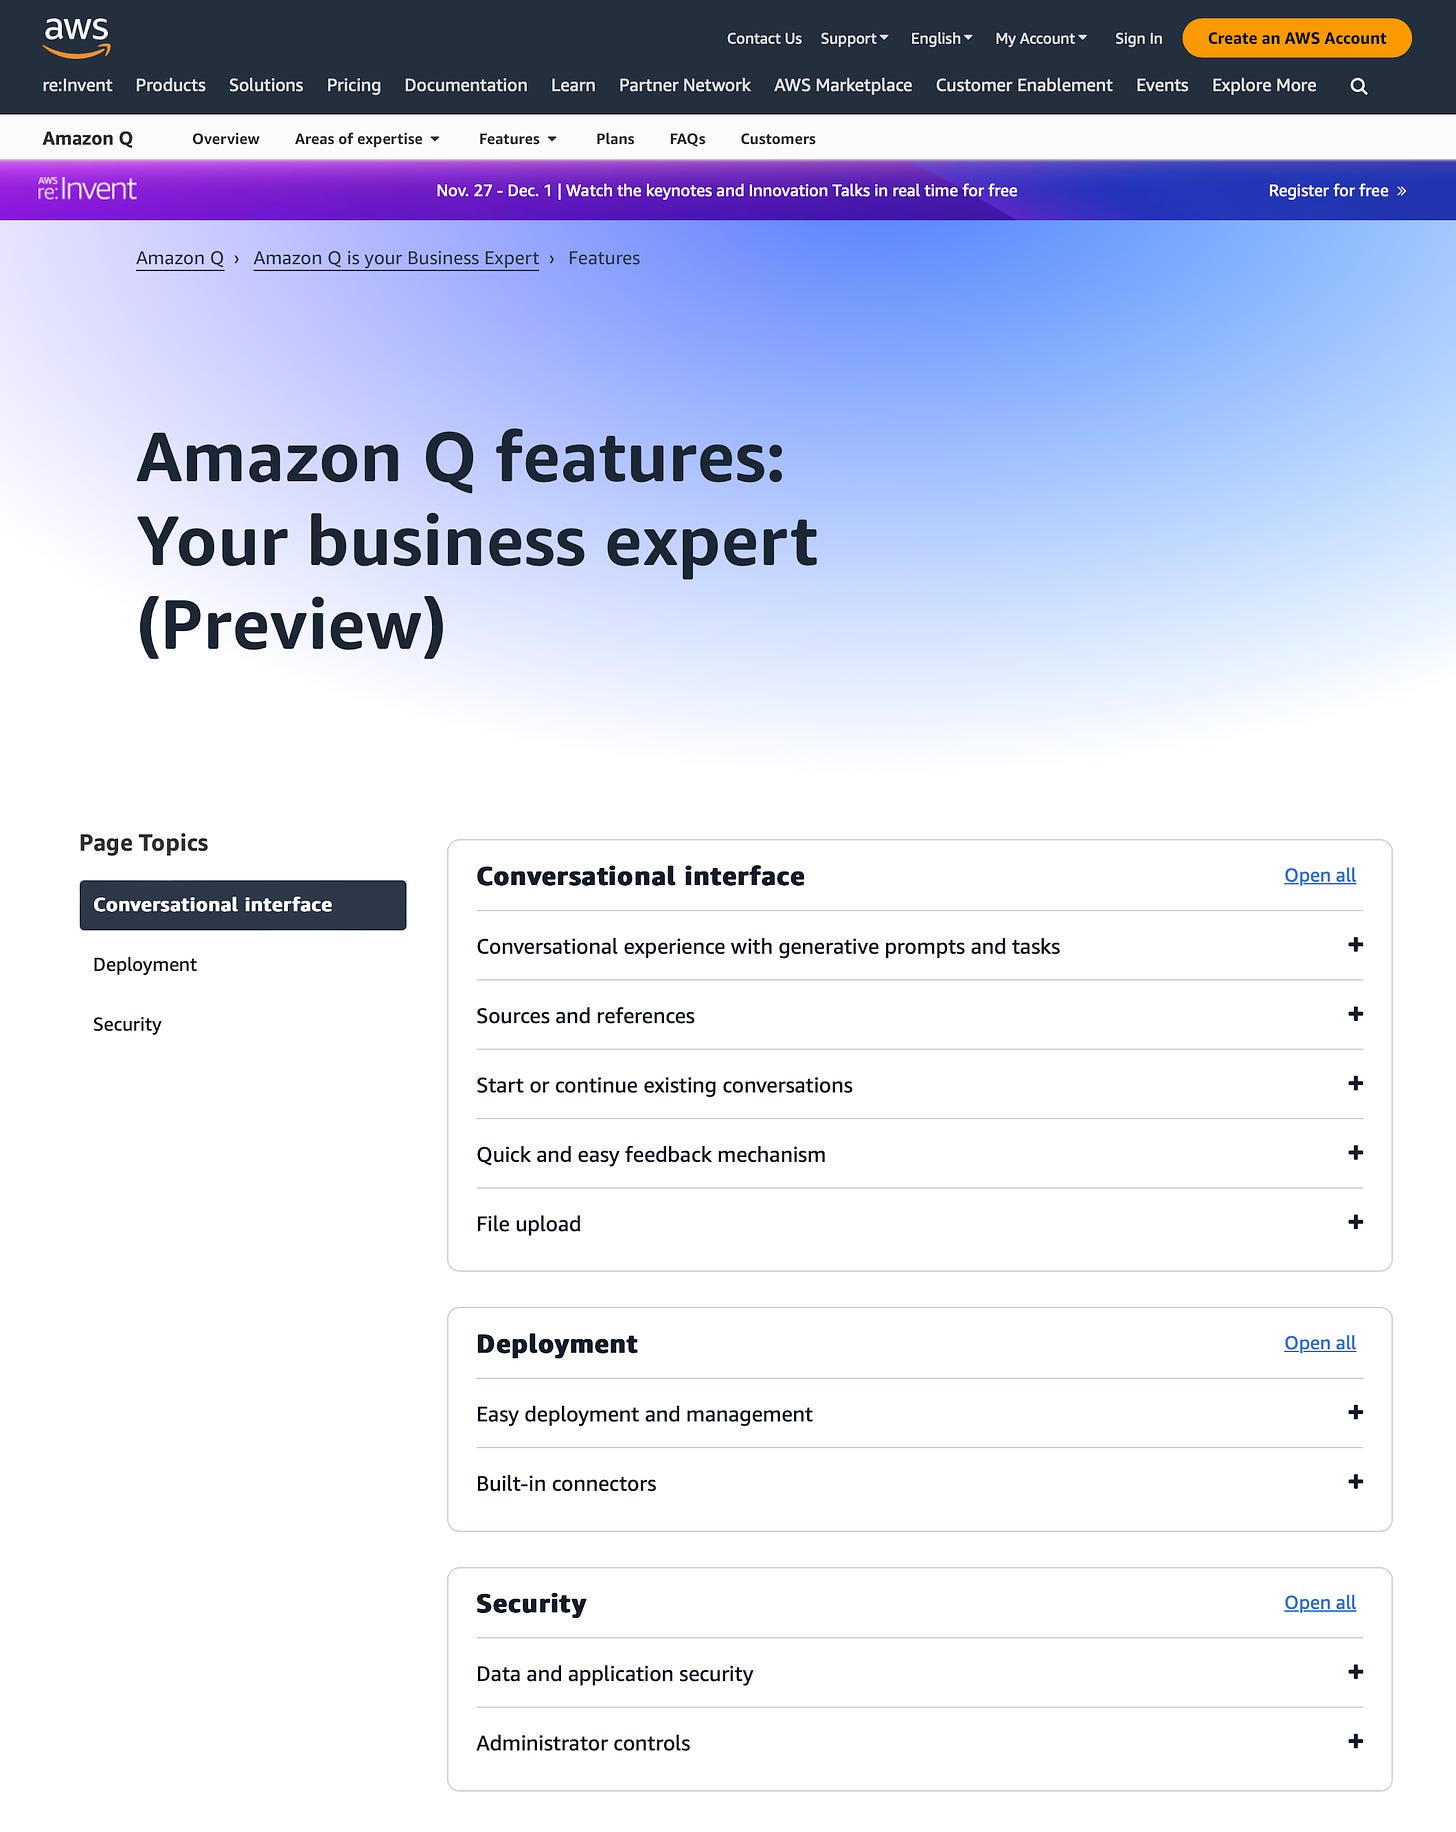 Explore how Amazon Q can help unlock more value from your enterprise knowledge